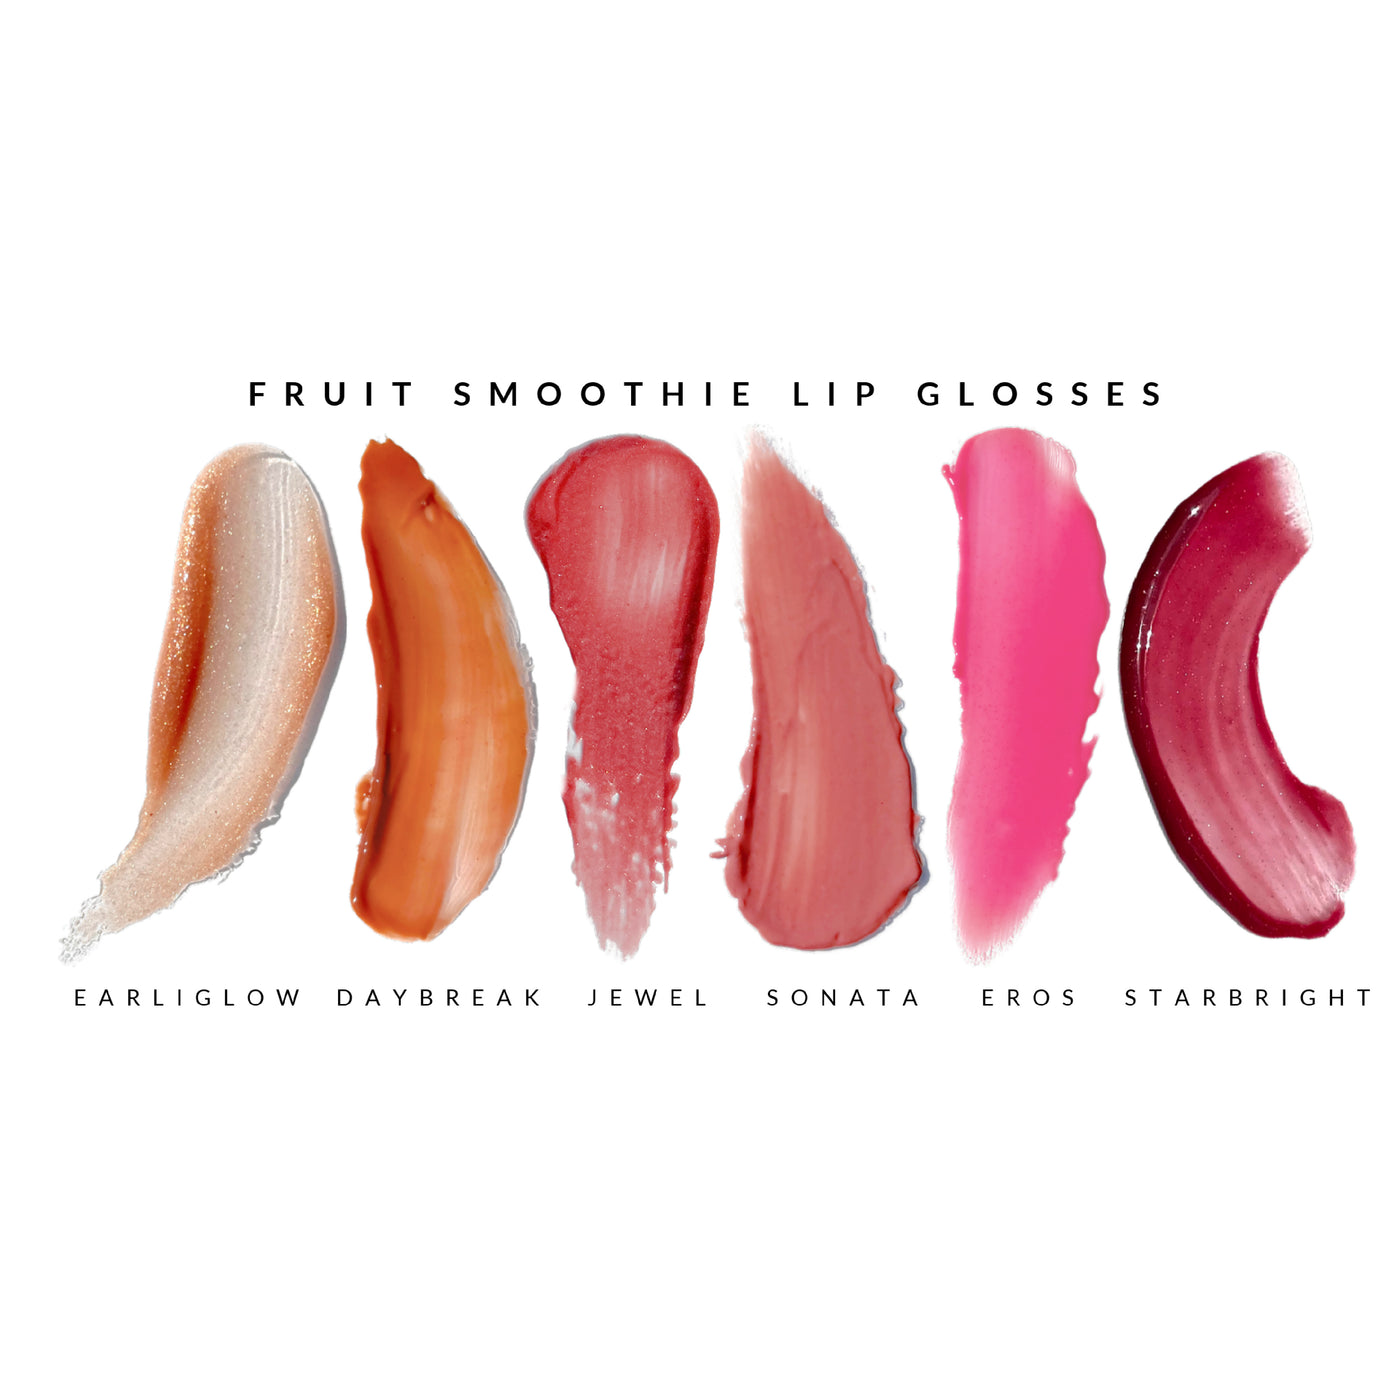 fruit smoothie lip gloss swatches - see product description for shades